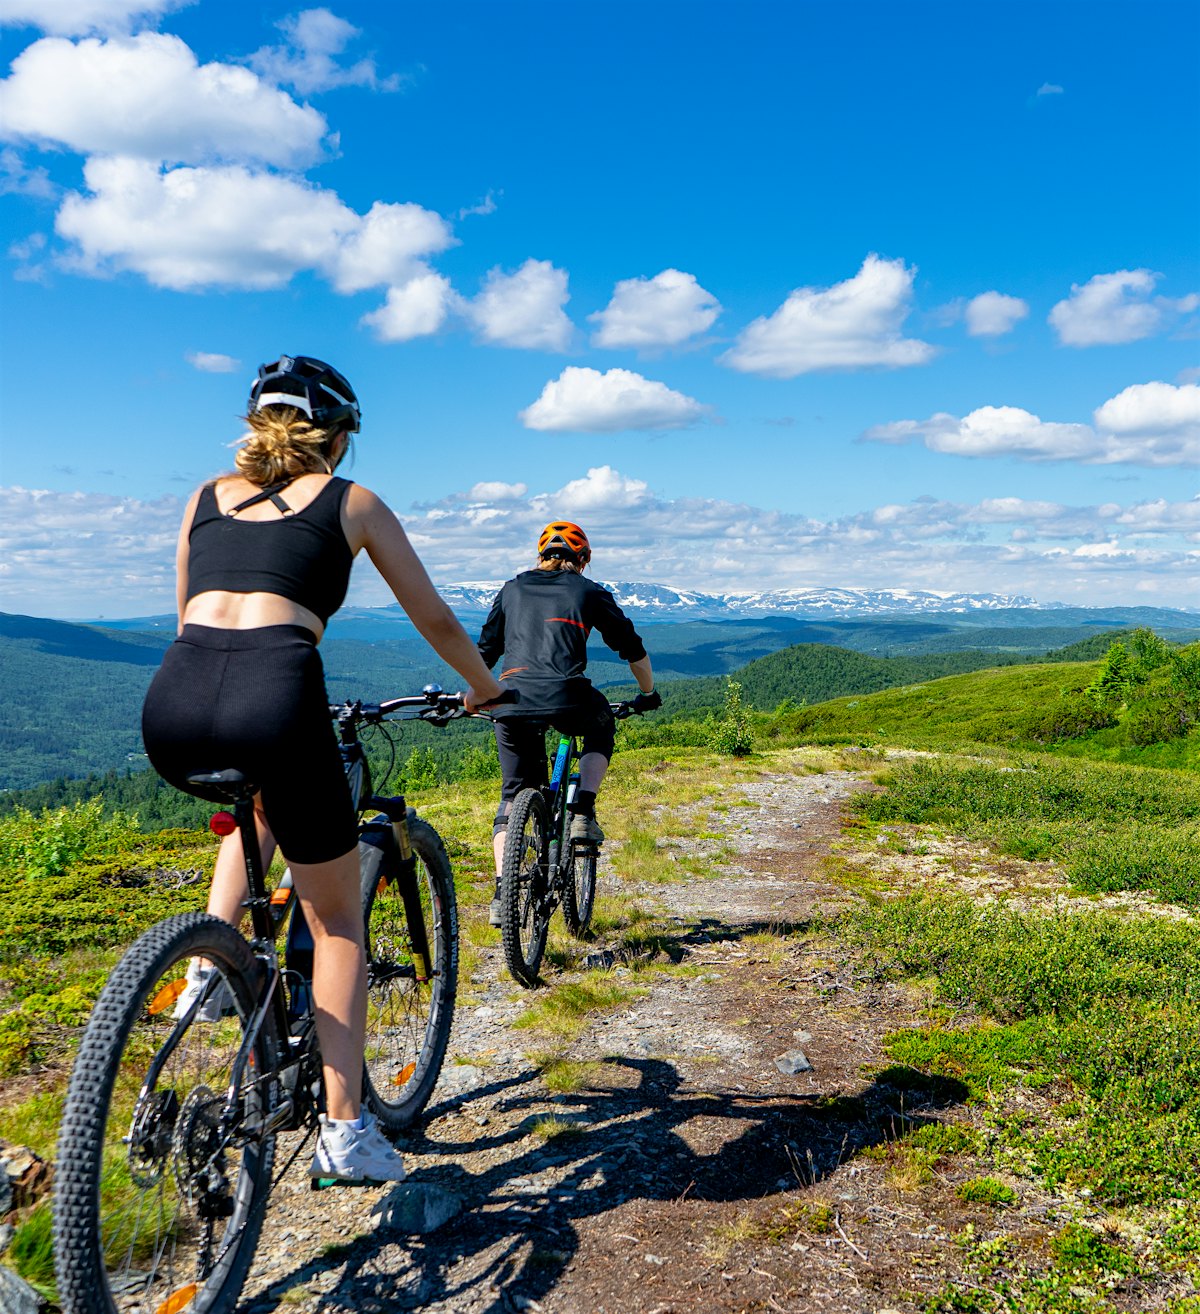 A boy and a girl are cycling on the mountain in good weather. Photo